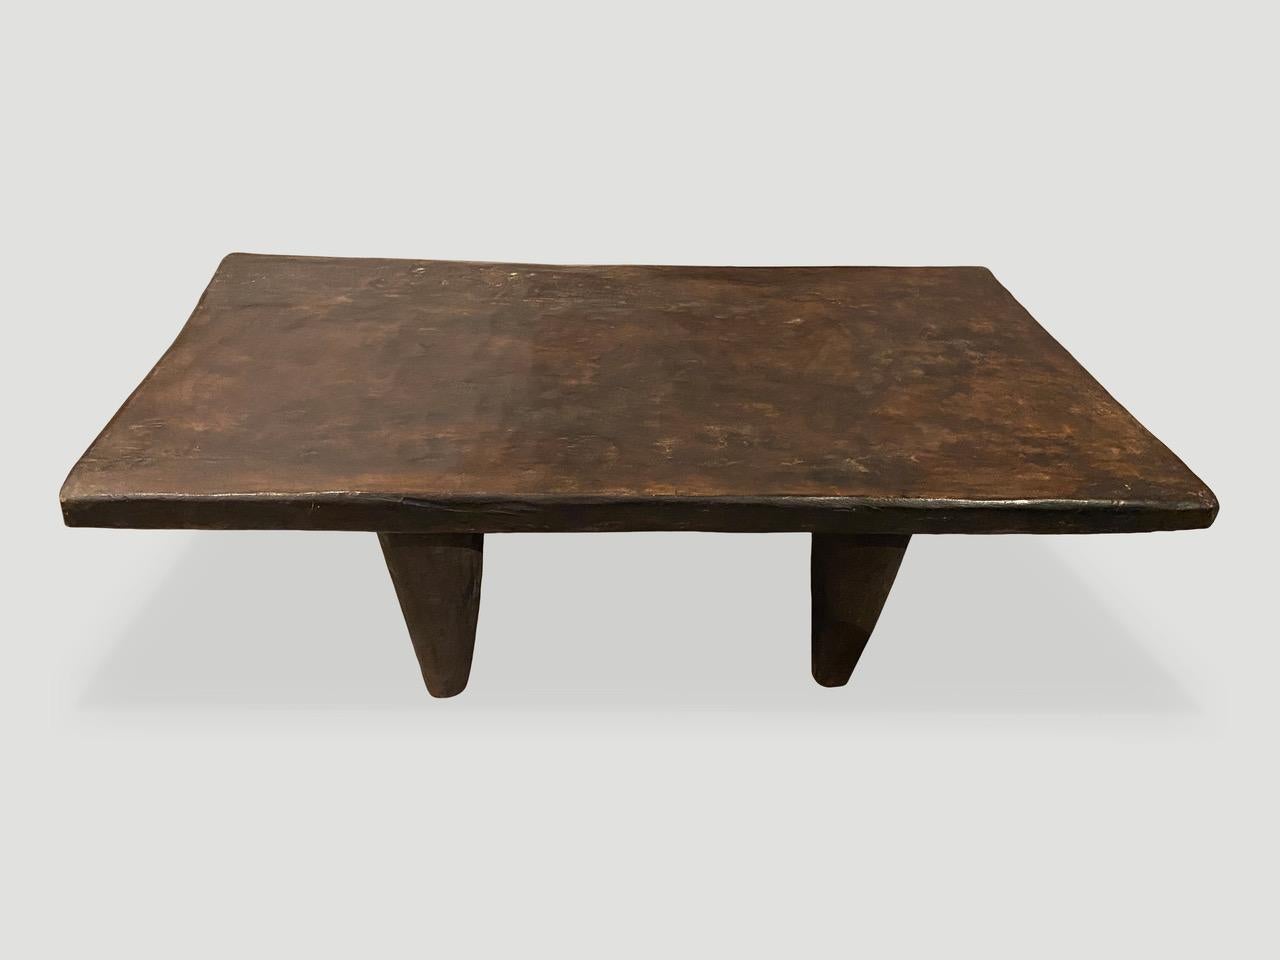 Antique coffee table hand carved by the Senufo tribes from a single block of Iroko wood, native to the west coast of Africa. The wood is tough, dense and very durable. Shown with cone style legs. We only source the best. This one is beautiful and